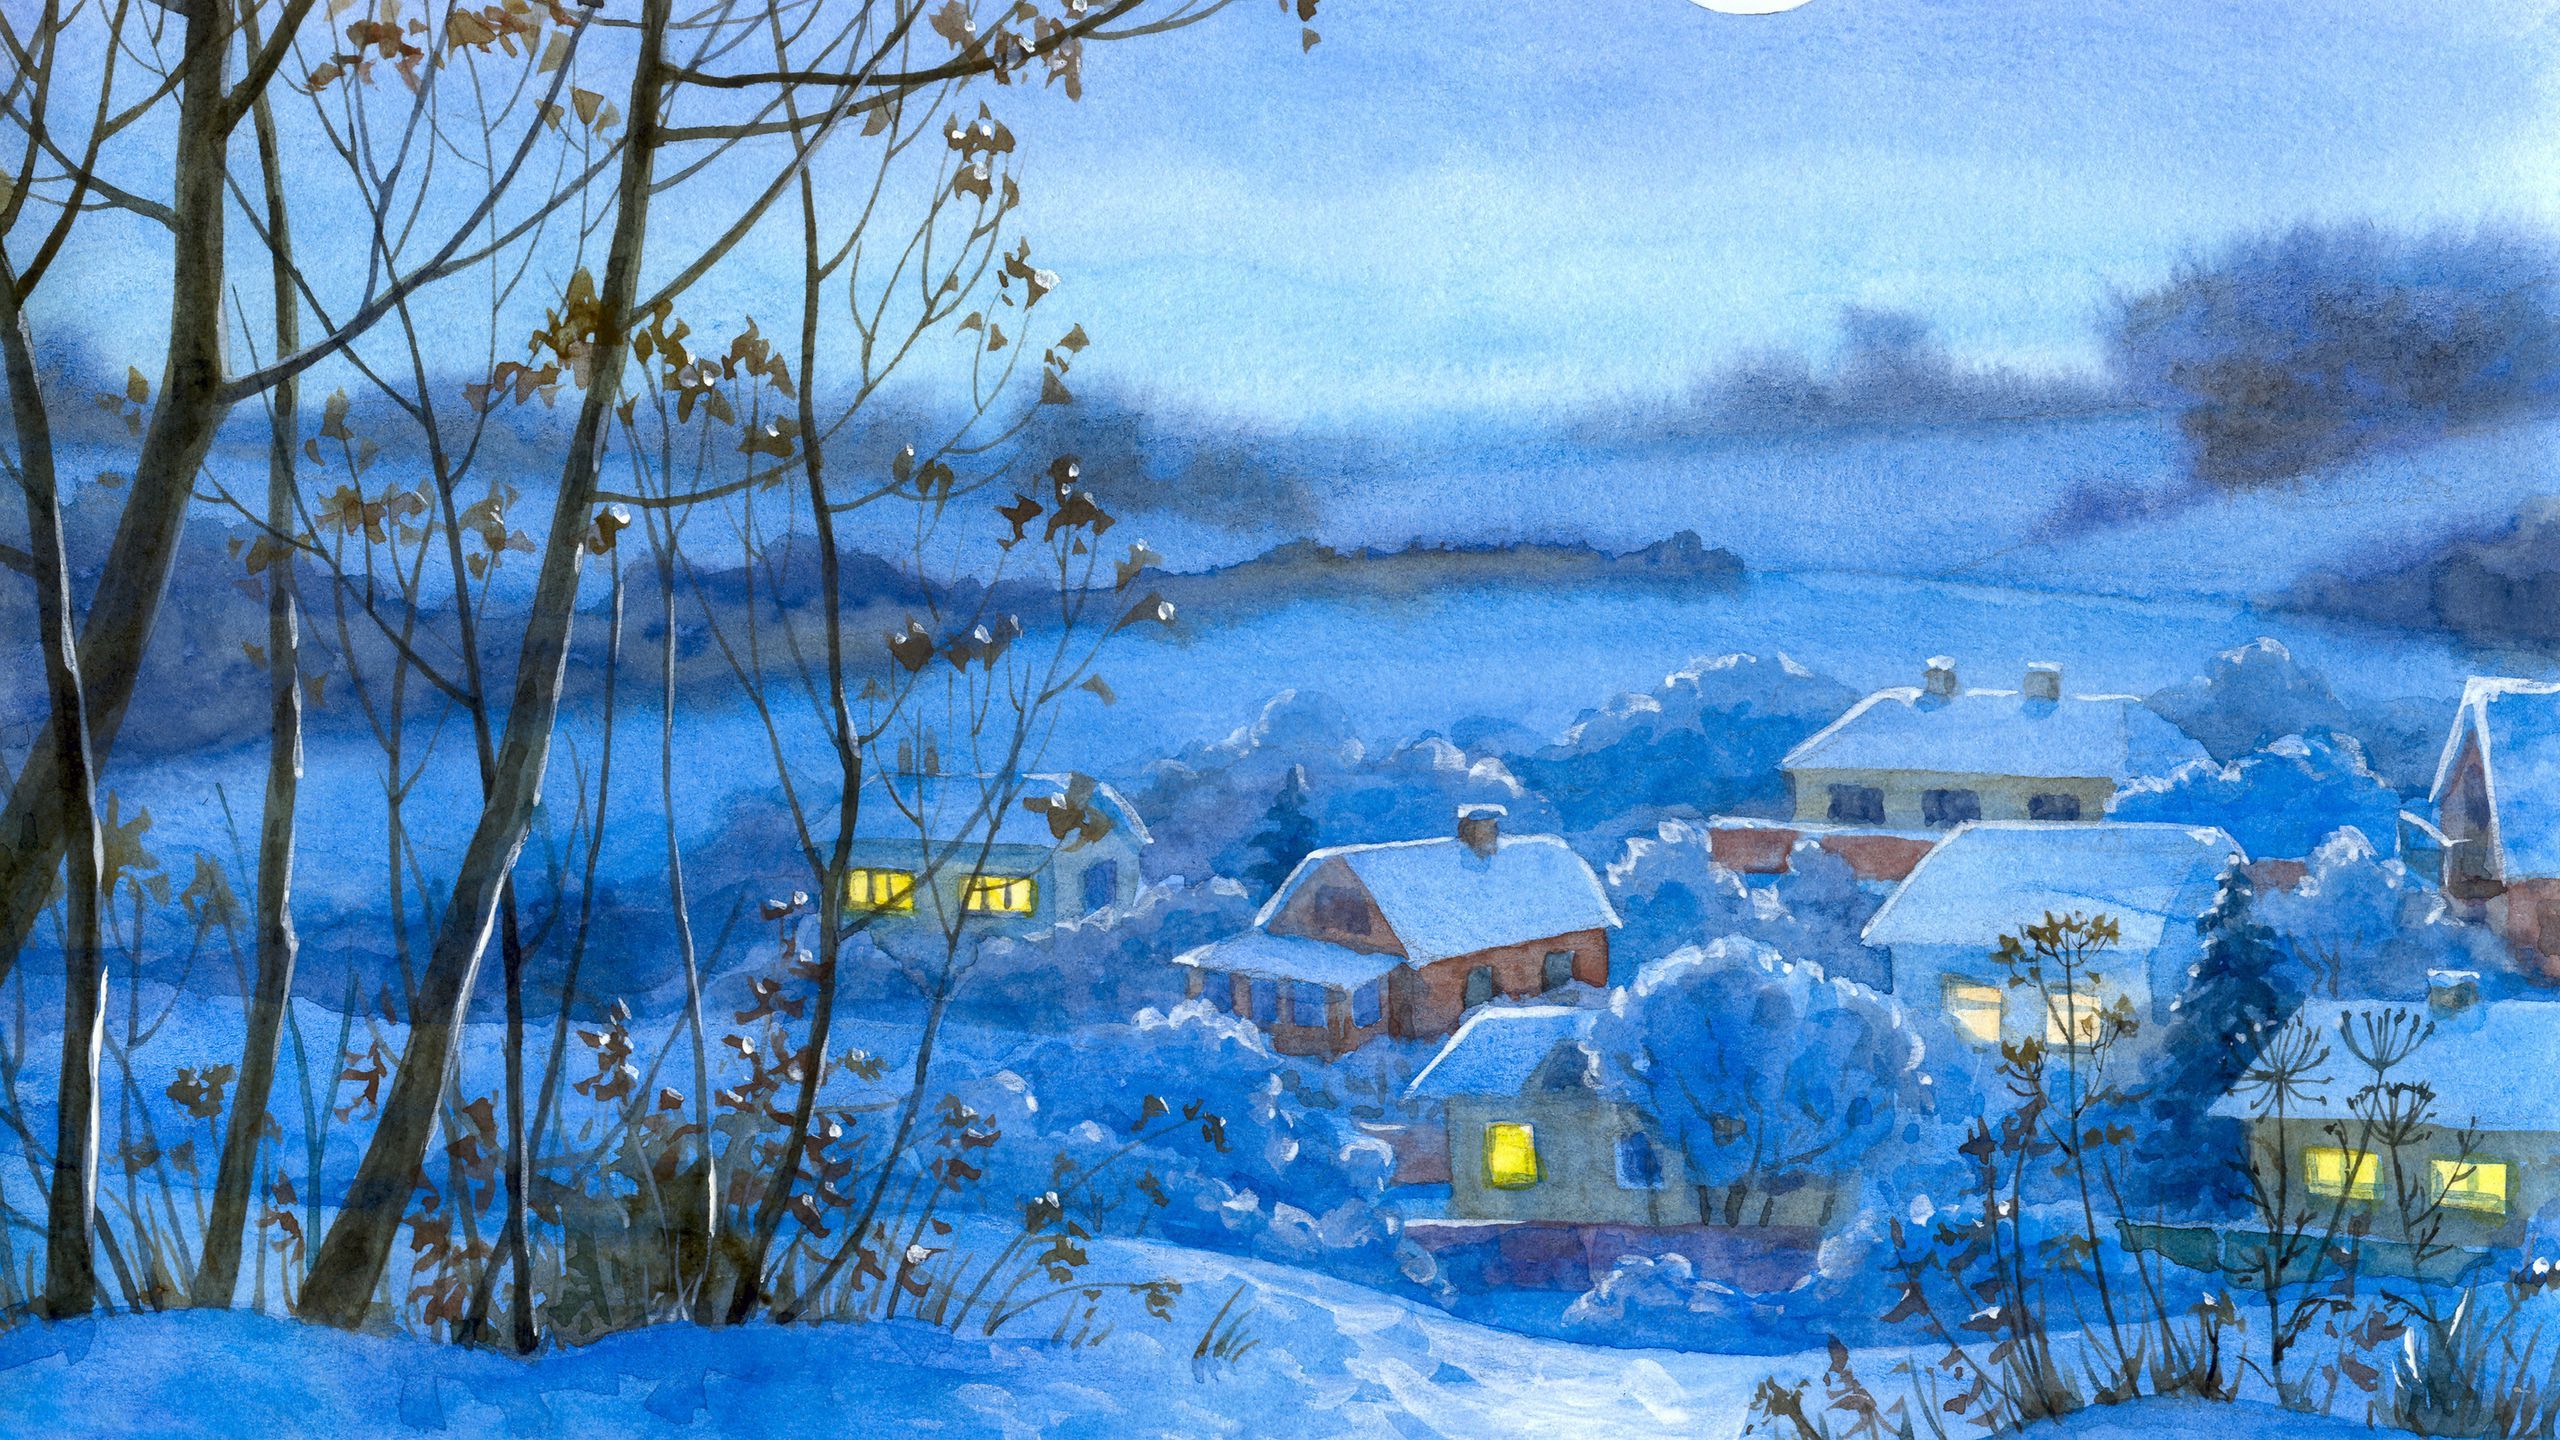 Download wallpaper 2560x1440 painting, winter, village, home, night, month, snow widescreen 16:9 HD background